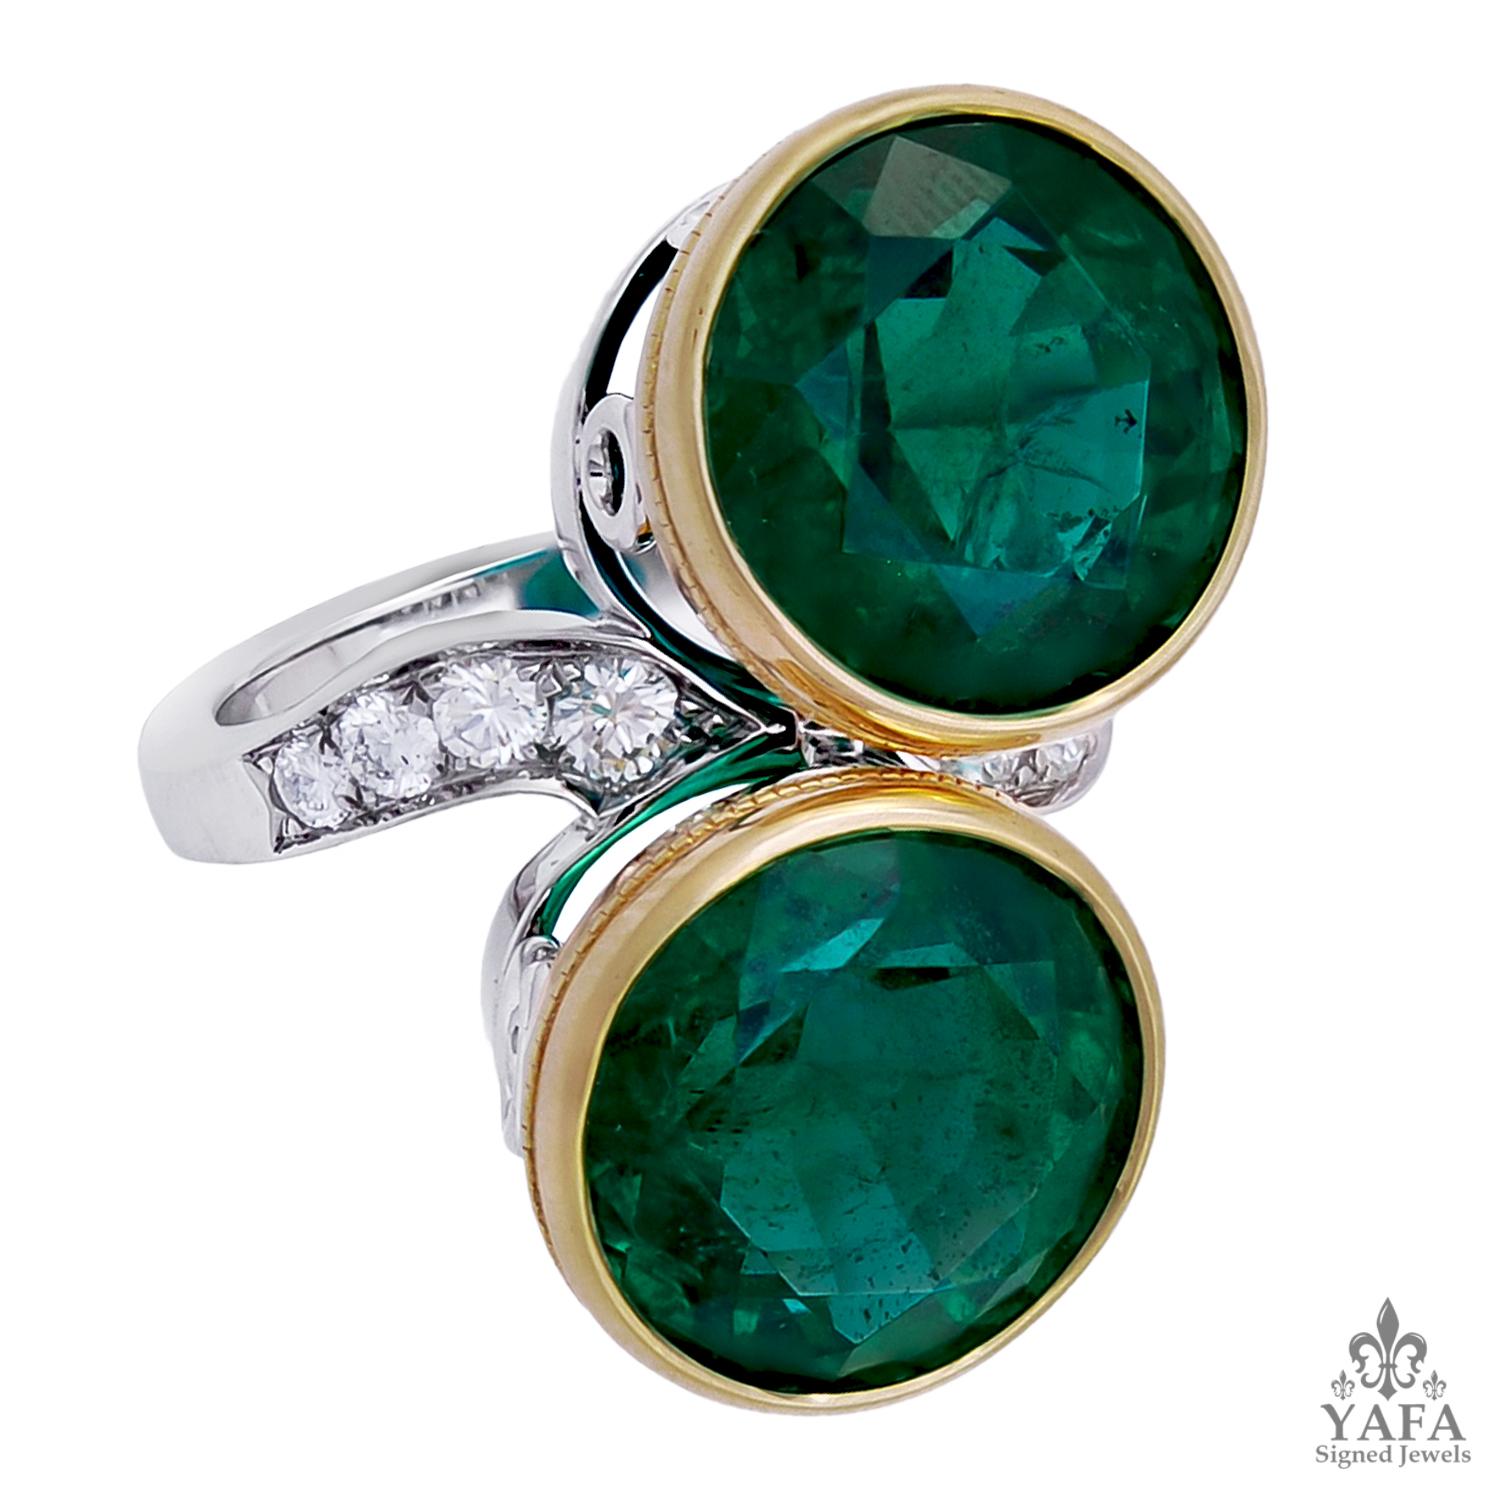 Bulgari  Rome Vintage Twin Emerald  Diamond Lovers Ring
An 18Kk yellow gold and platinum bypass ring, set with two round emerald and diamonds, signed Bulgari.
emerald weights are 8.27 cts and 8.34 cts.
ring size 6.5
signed “BVLGARI“; circa 1980s